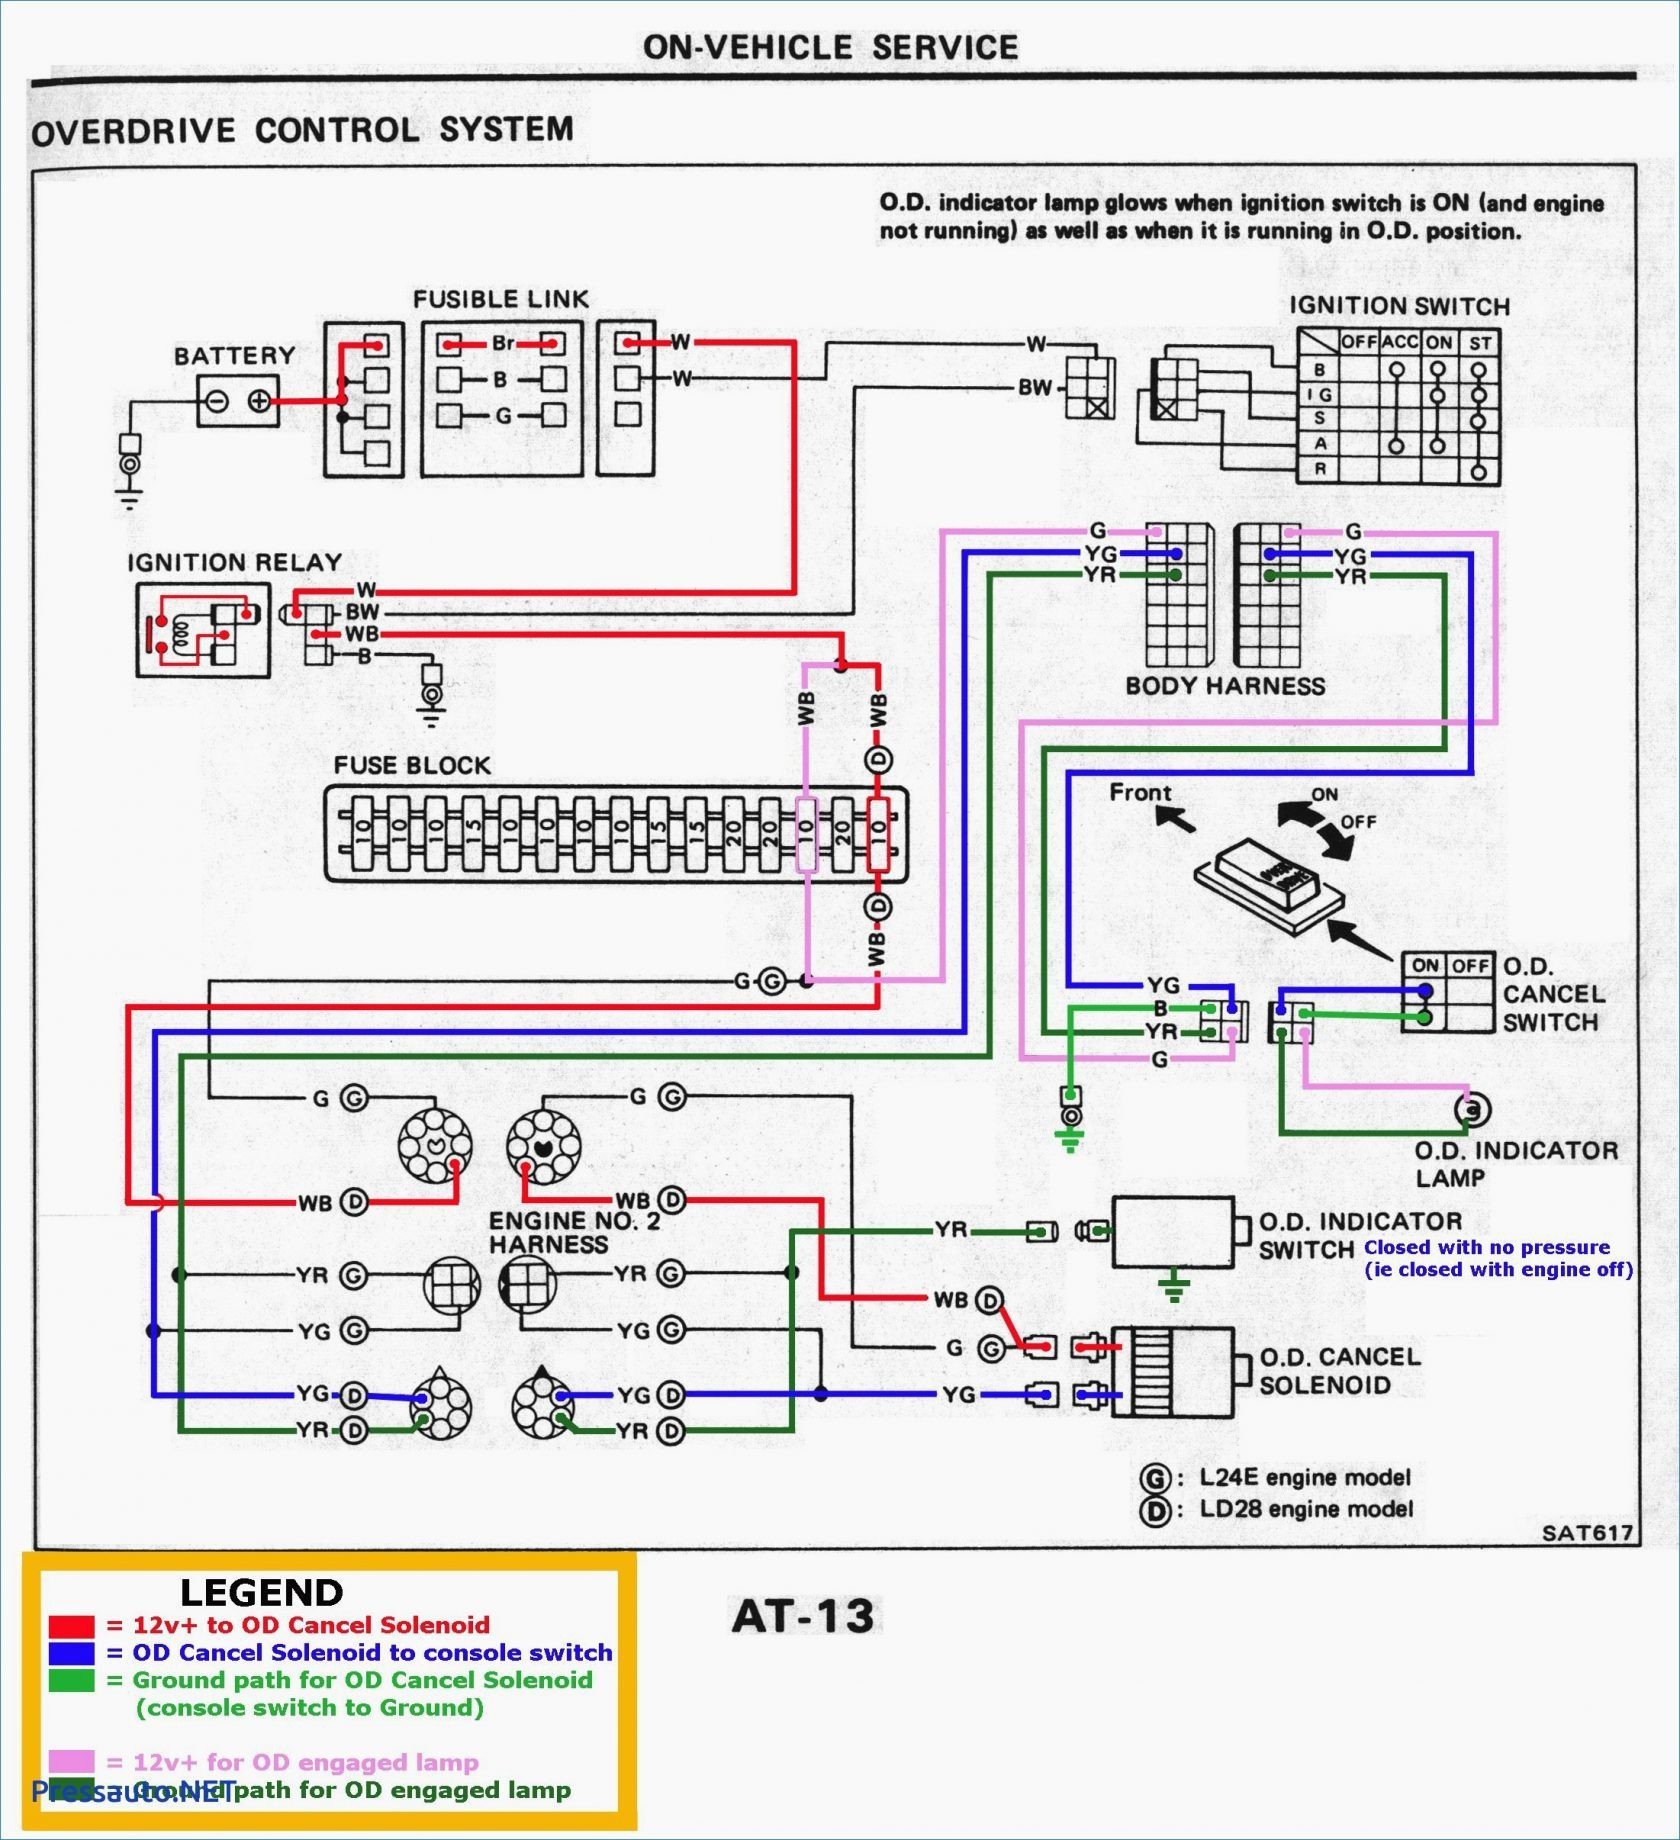 2001 Chevy S10 Wiring Harness Diagram Wiring Diagram Centre 2001 Chevy S10 Wiring Harness